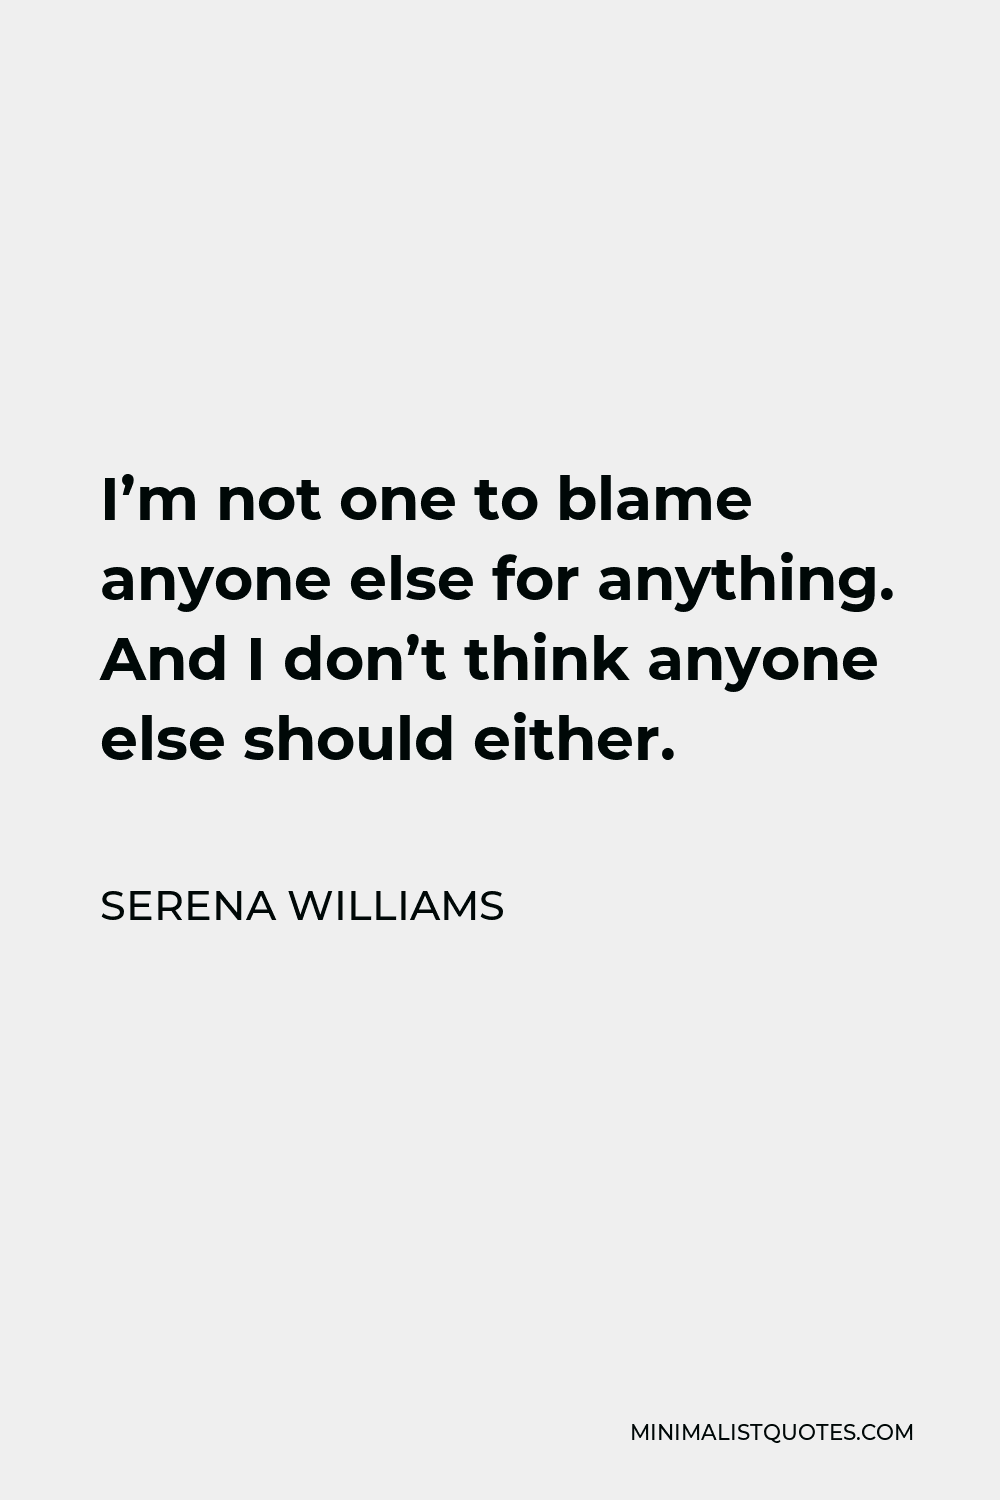 Serena Williams Quote - I’m not one to blame anyone else for anything. And I don’t think anyone else should either.